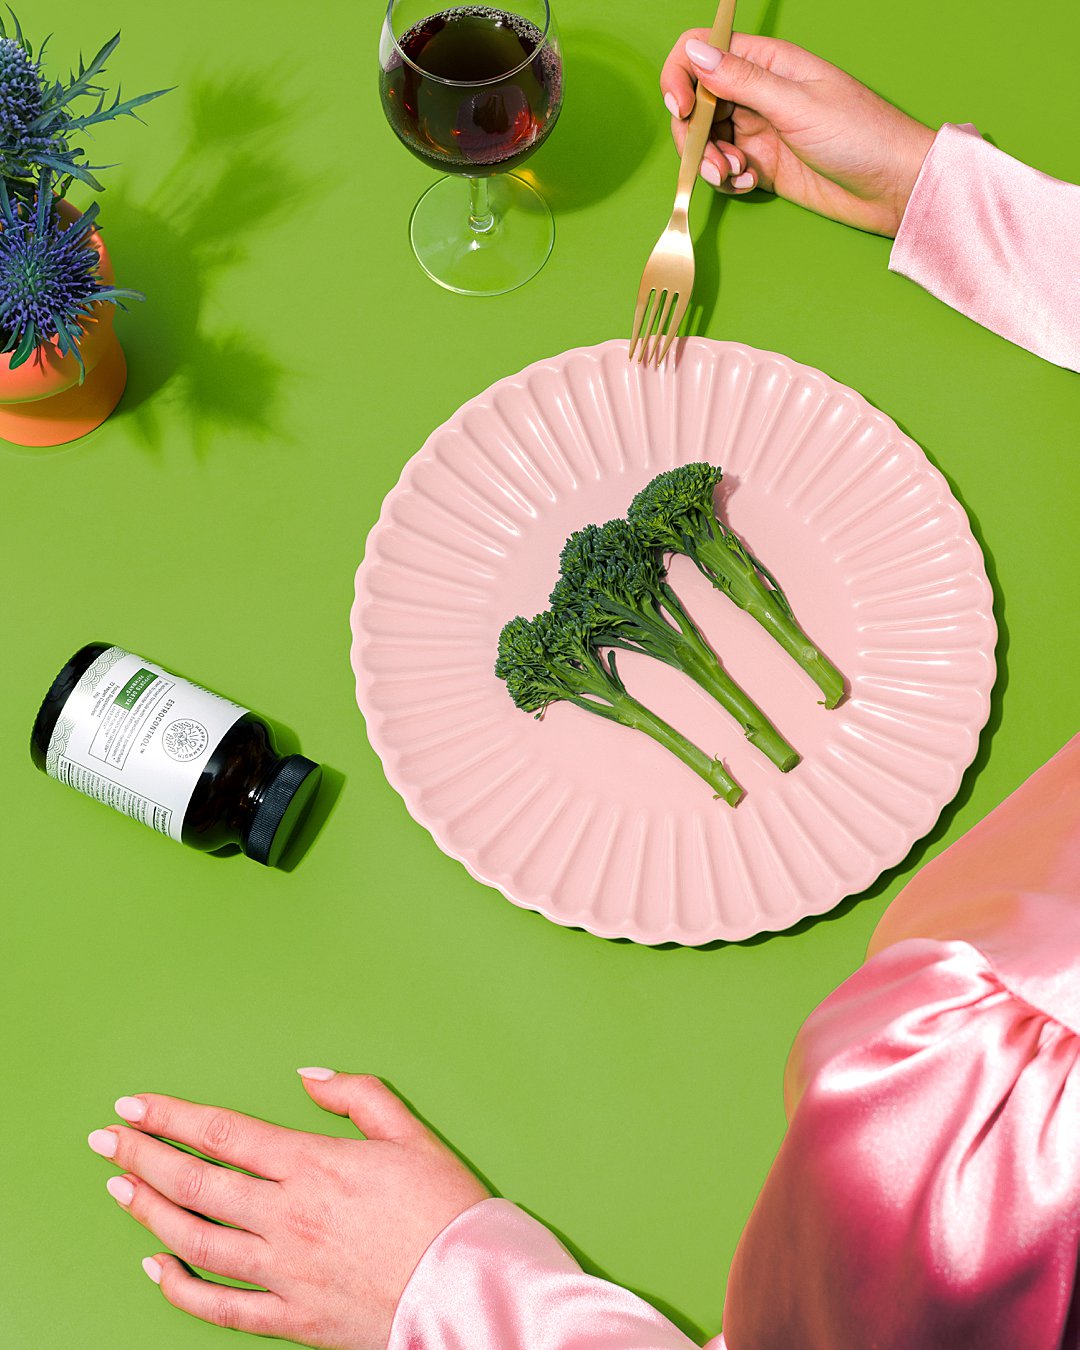 Colourful content creation for The Happy Mammoth. Styled supplement and vitamin product still life photography by HIYA MARIANNE photo production studio.